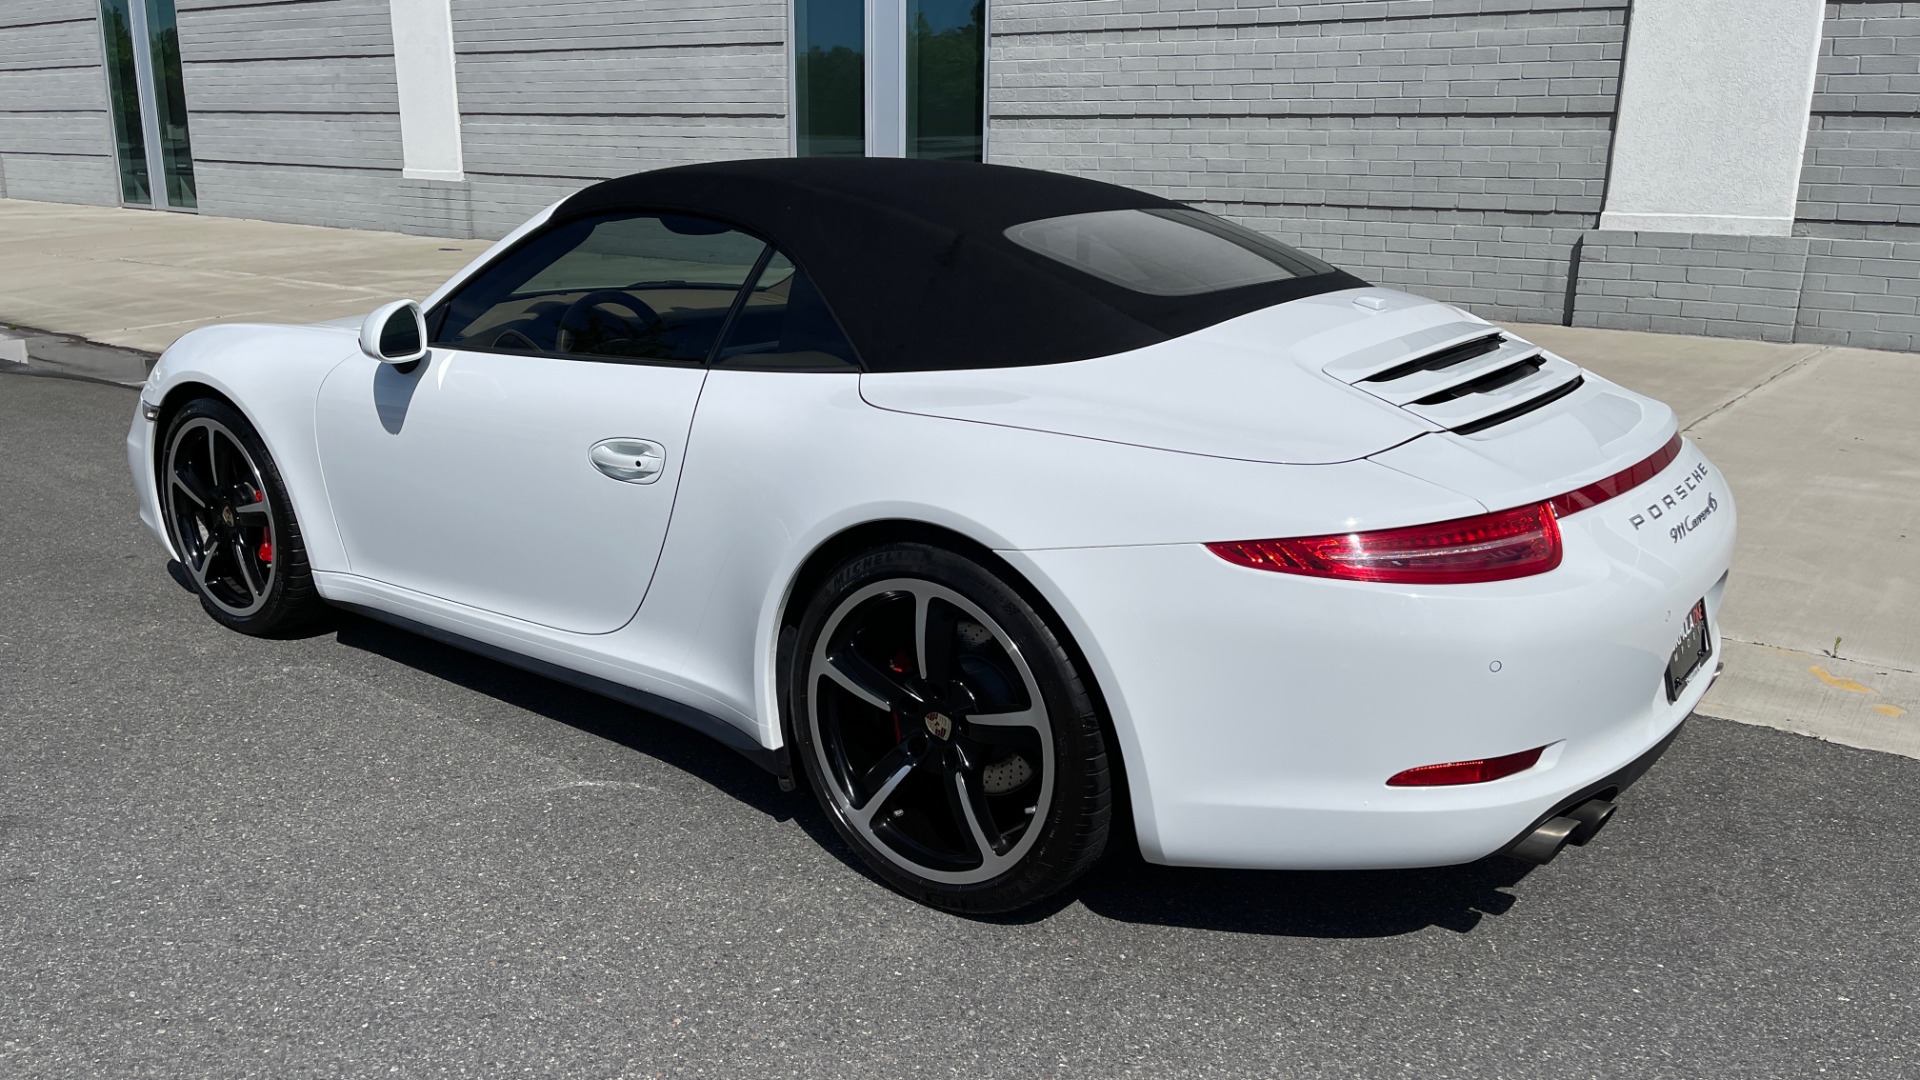 Used 2013 Porsche 911 CARRERA 4S CABRIOLET / PREMIUM PLUS / BOSE / PDK / PDLS for sale Sold at Formula Imports in Charlotte NC 28227 9